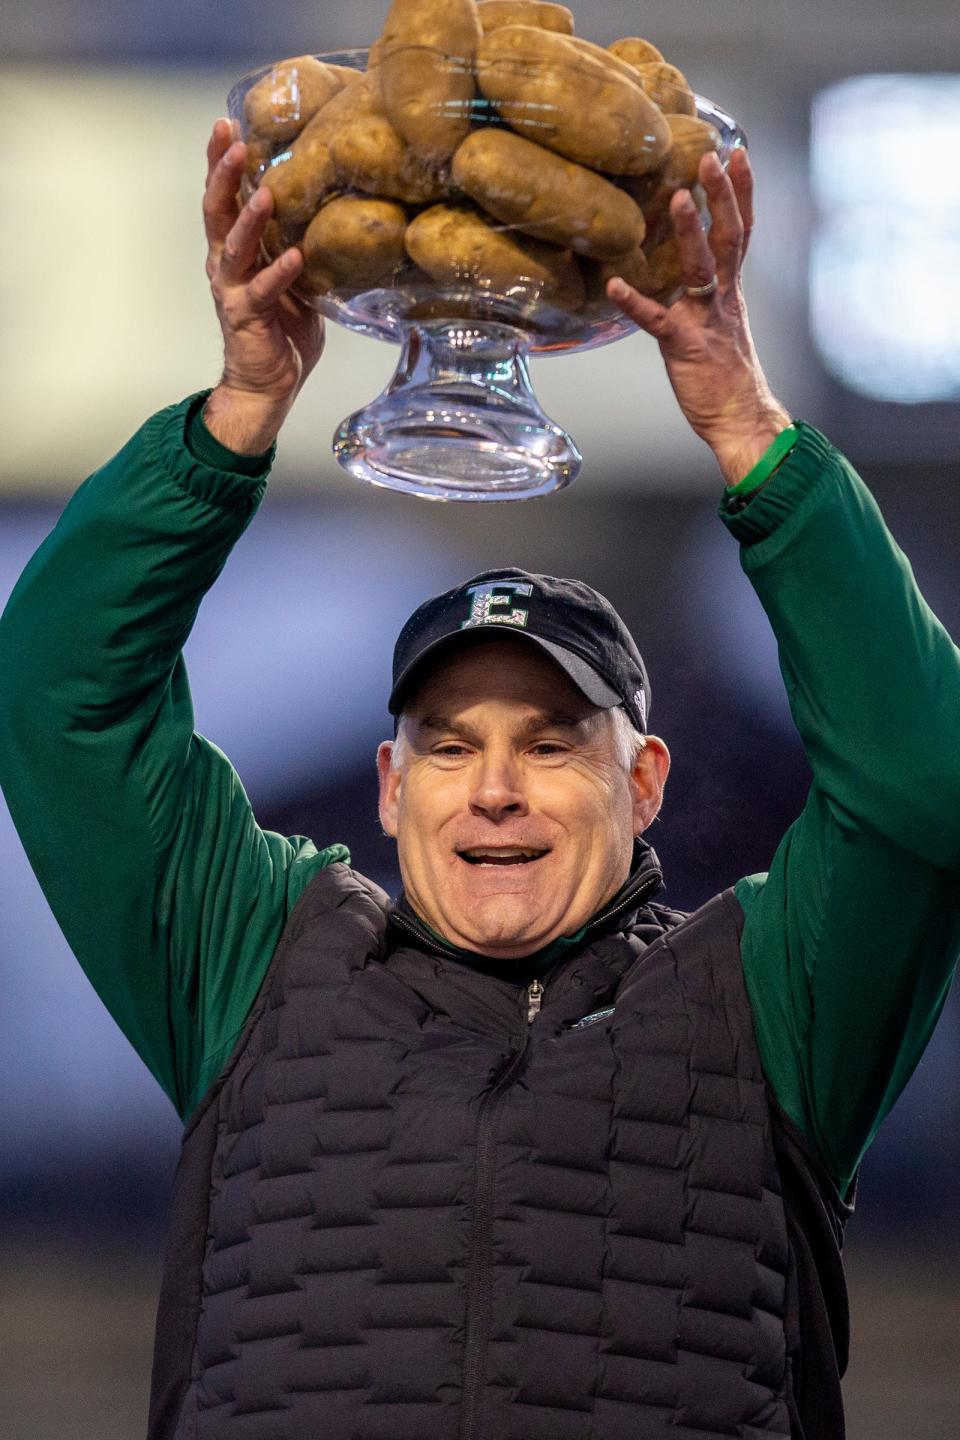 Eastern Michigan coach Chris Creighton lifts the trophy after of the 41-27 win over San Jose State in the Famous Idaho Potato Bowl on Tuesday, Dec. 20, 2022, in Boise, Idaho.